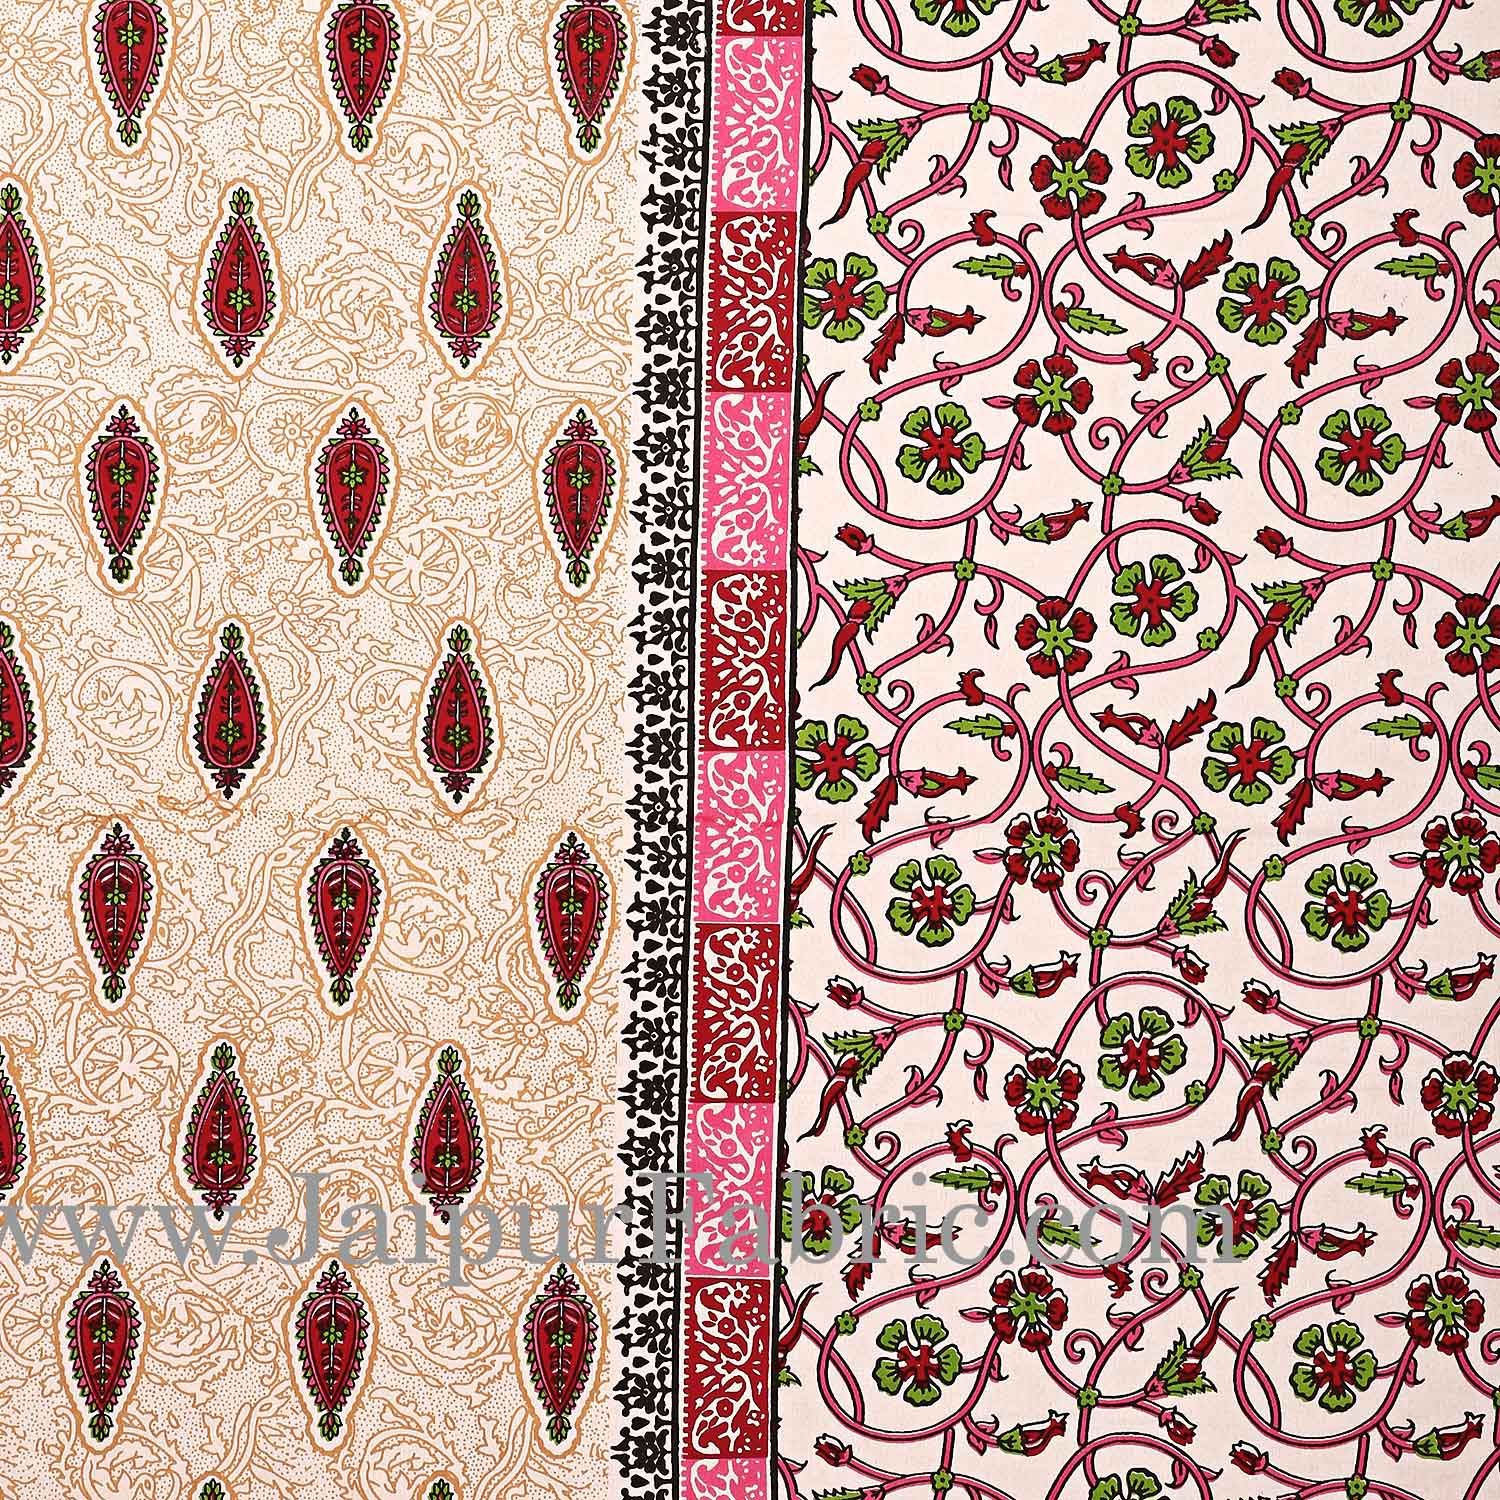 Pink Border with broad jaal pattern cotton double bedsheet